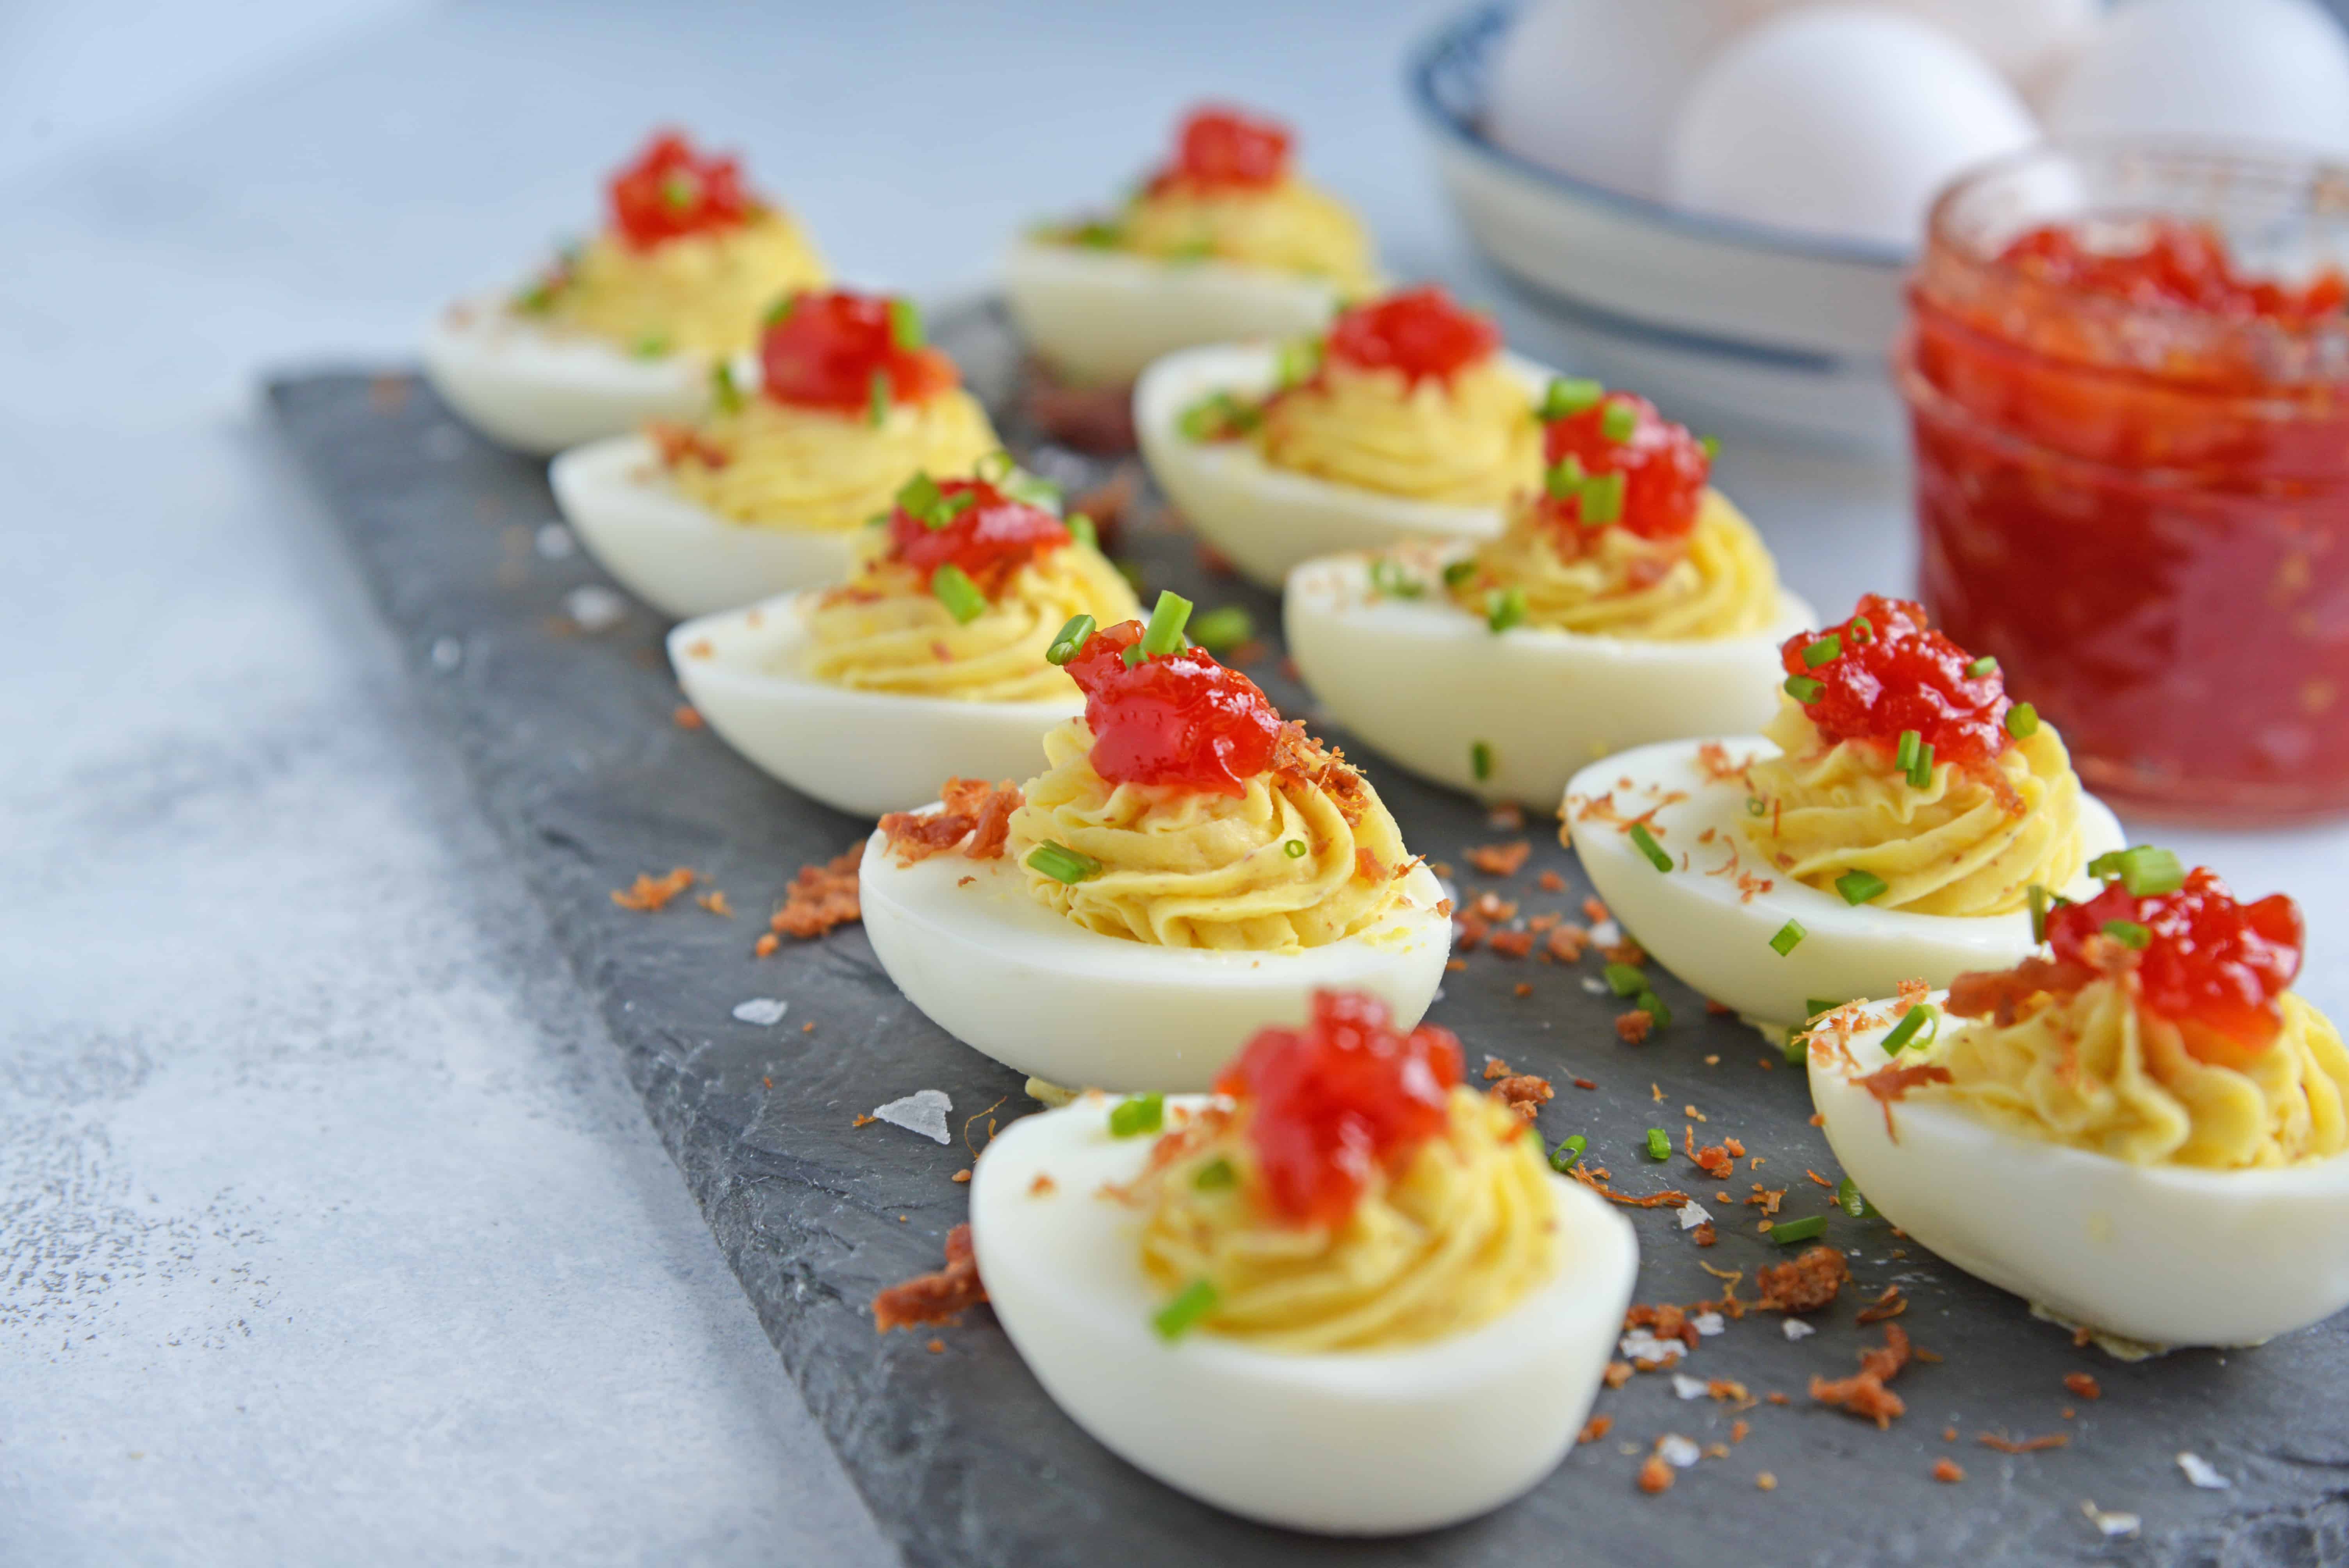 Tomato Jam Deviled Eggs use sweet tomato jam with tangy horseradish in a devilishly creamy deviled egg filling. Top with chives and serve! #deviledeggs www.savoryexperiments.com 